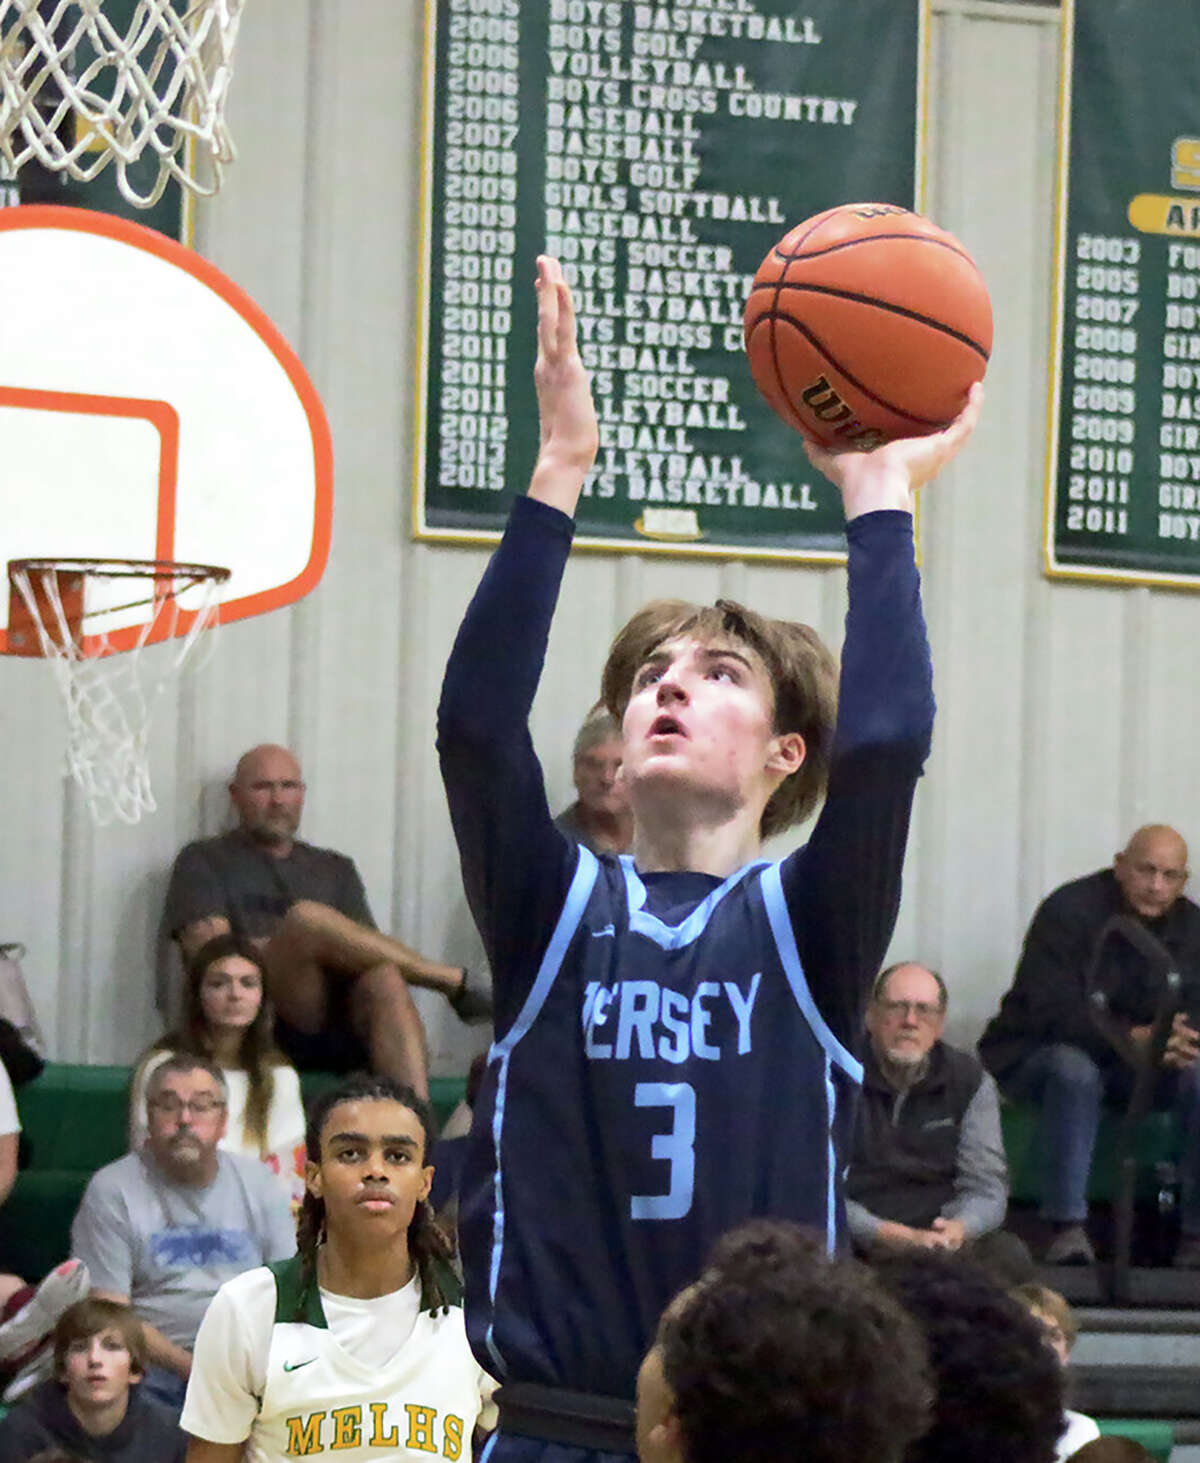 Jersey's Jaxon Brunaugh scored 15 points and helped the Panthers get past Southwestern 52-5=45 Tuesday.